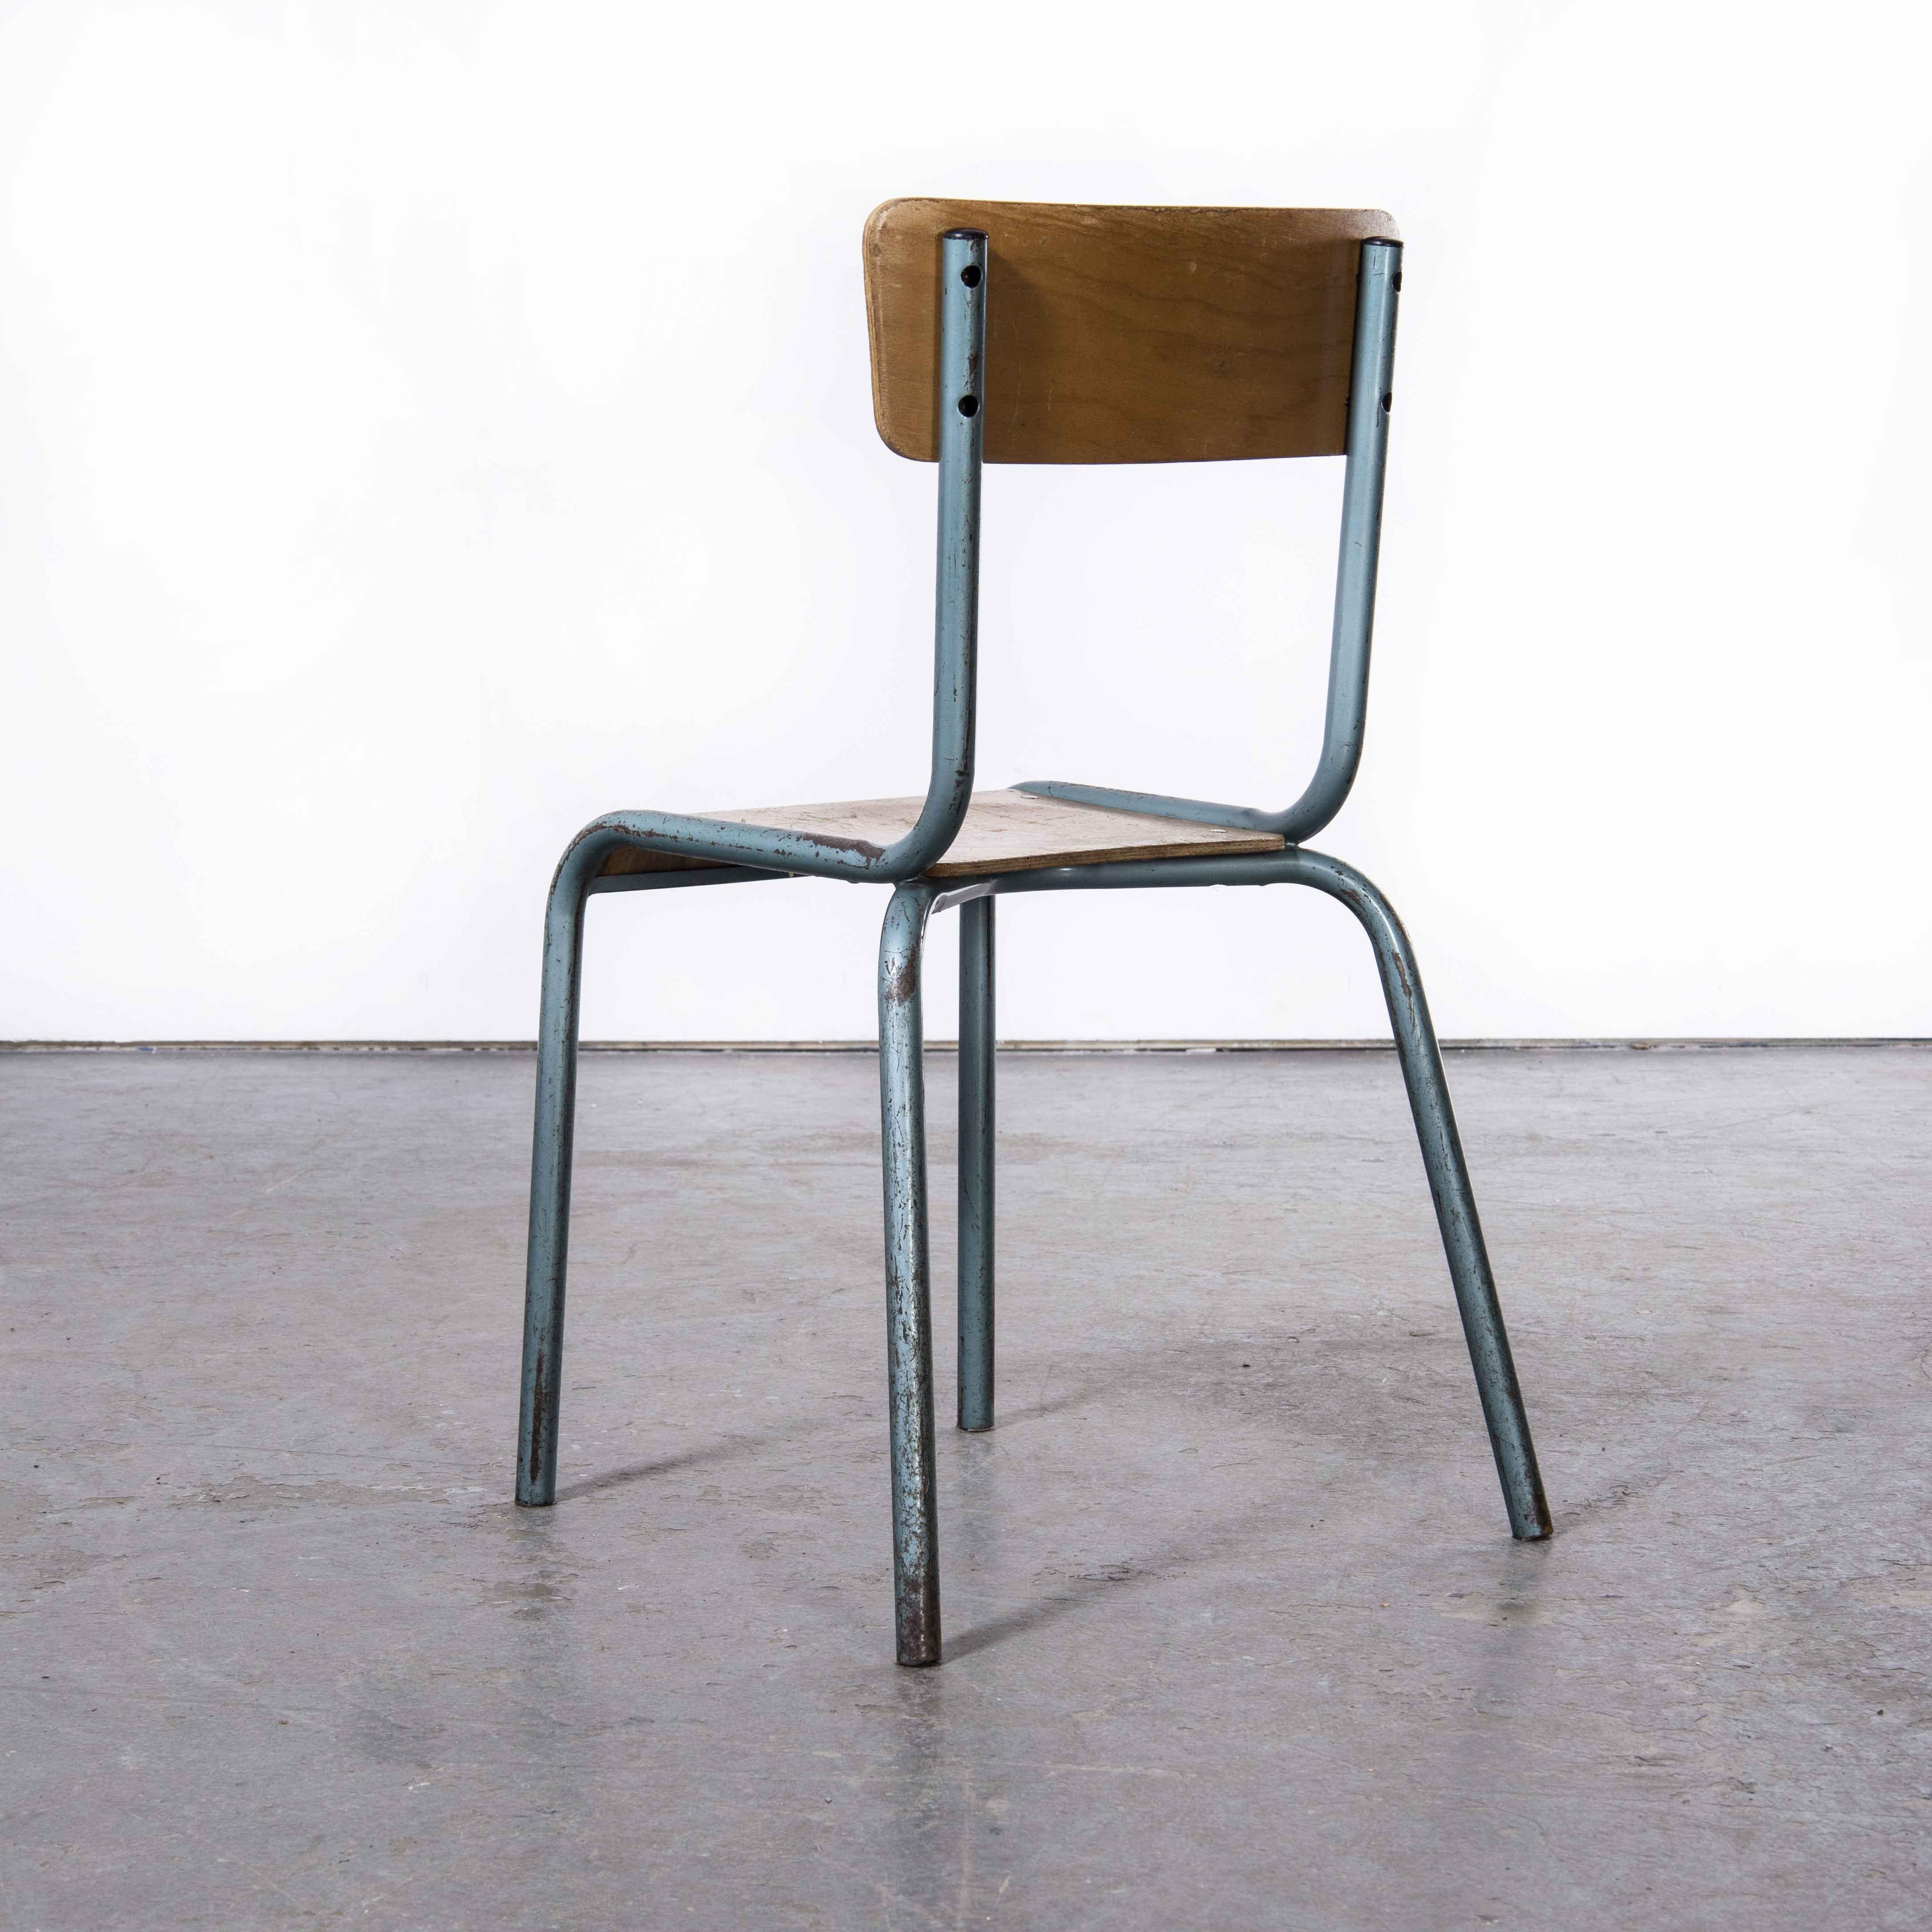 1950’s French Mullca Vintage stacking school – dining chairs – aqua model 510/1 – set of six
1950’s French Mullca vintage stacking school – dining chairs – aqua model 510/1 – set of six. One of our most favourite chairs, in 1947 Robert Muller and